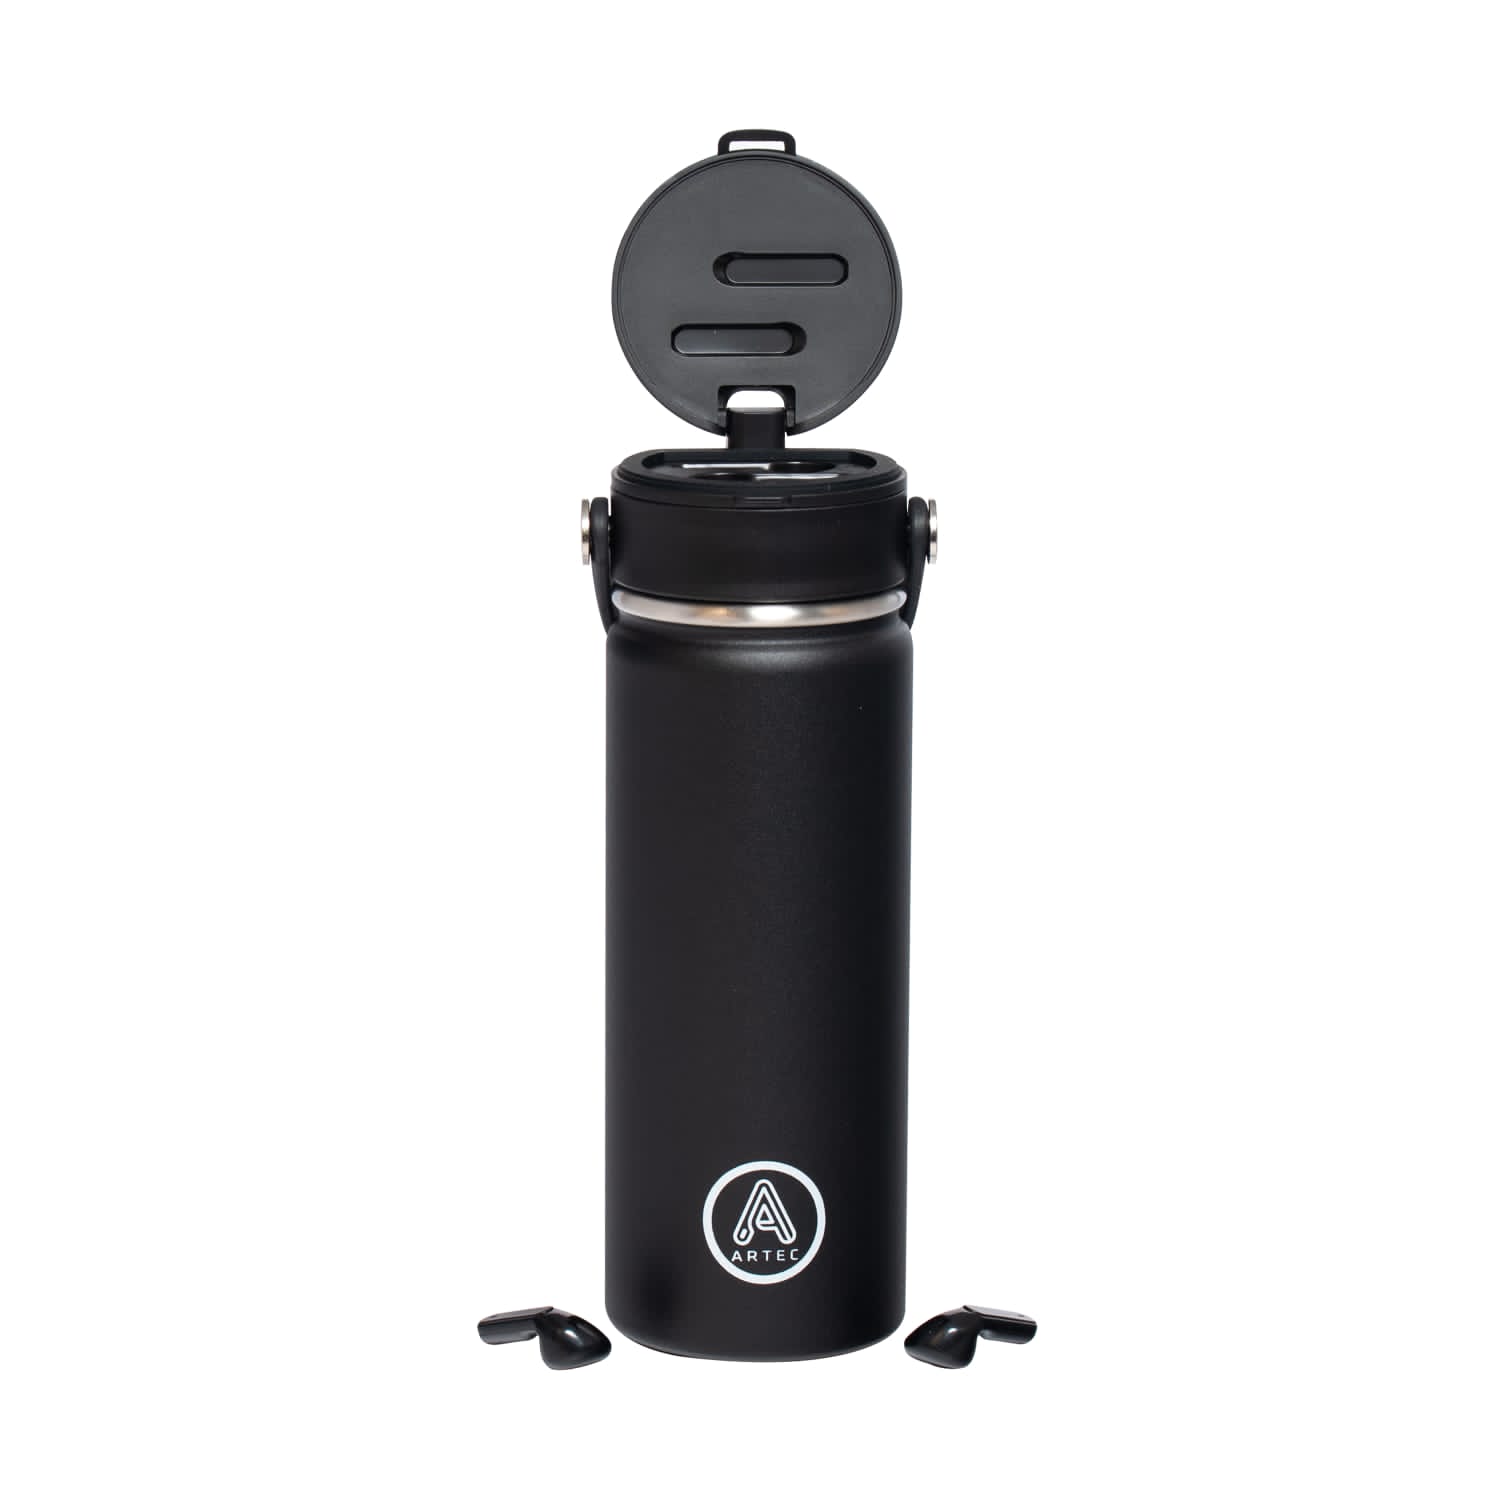 Thermos with TWS airpods integrated.